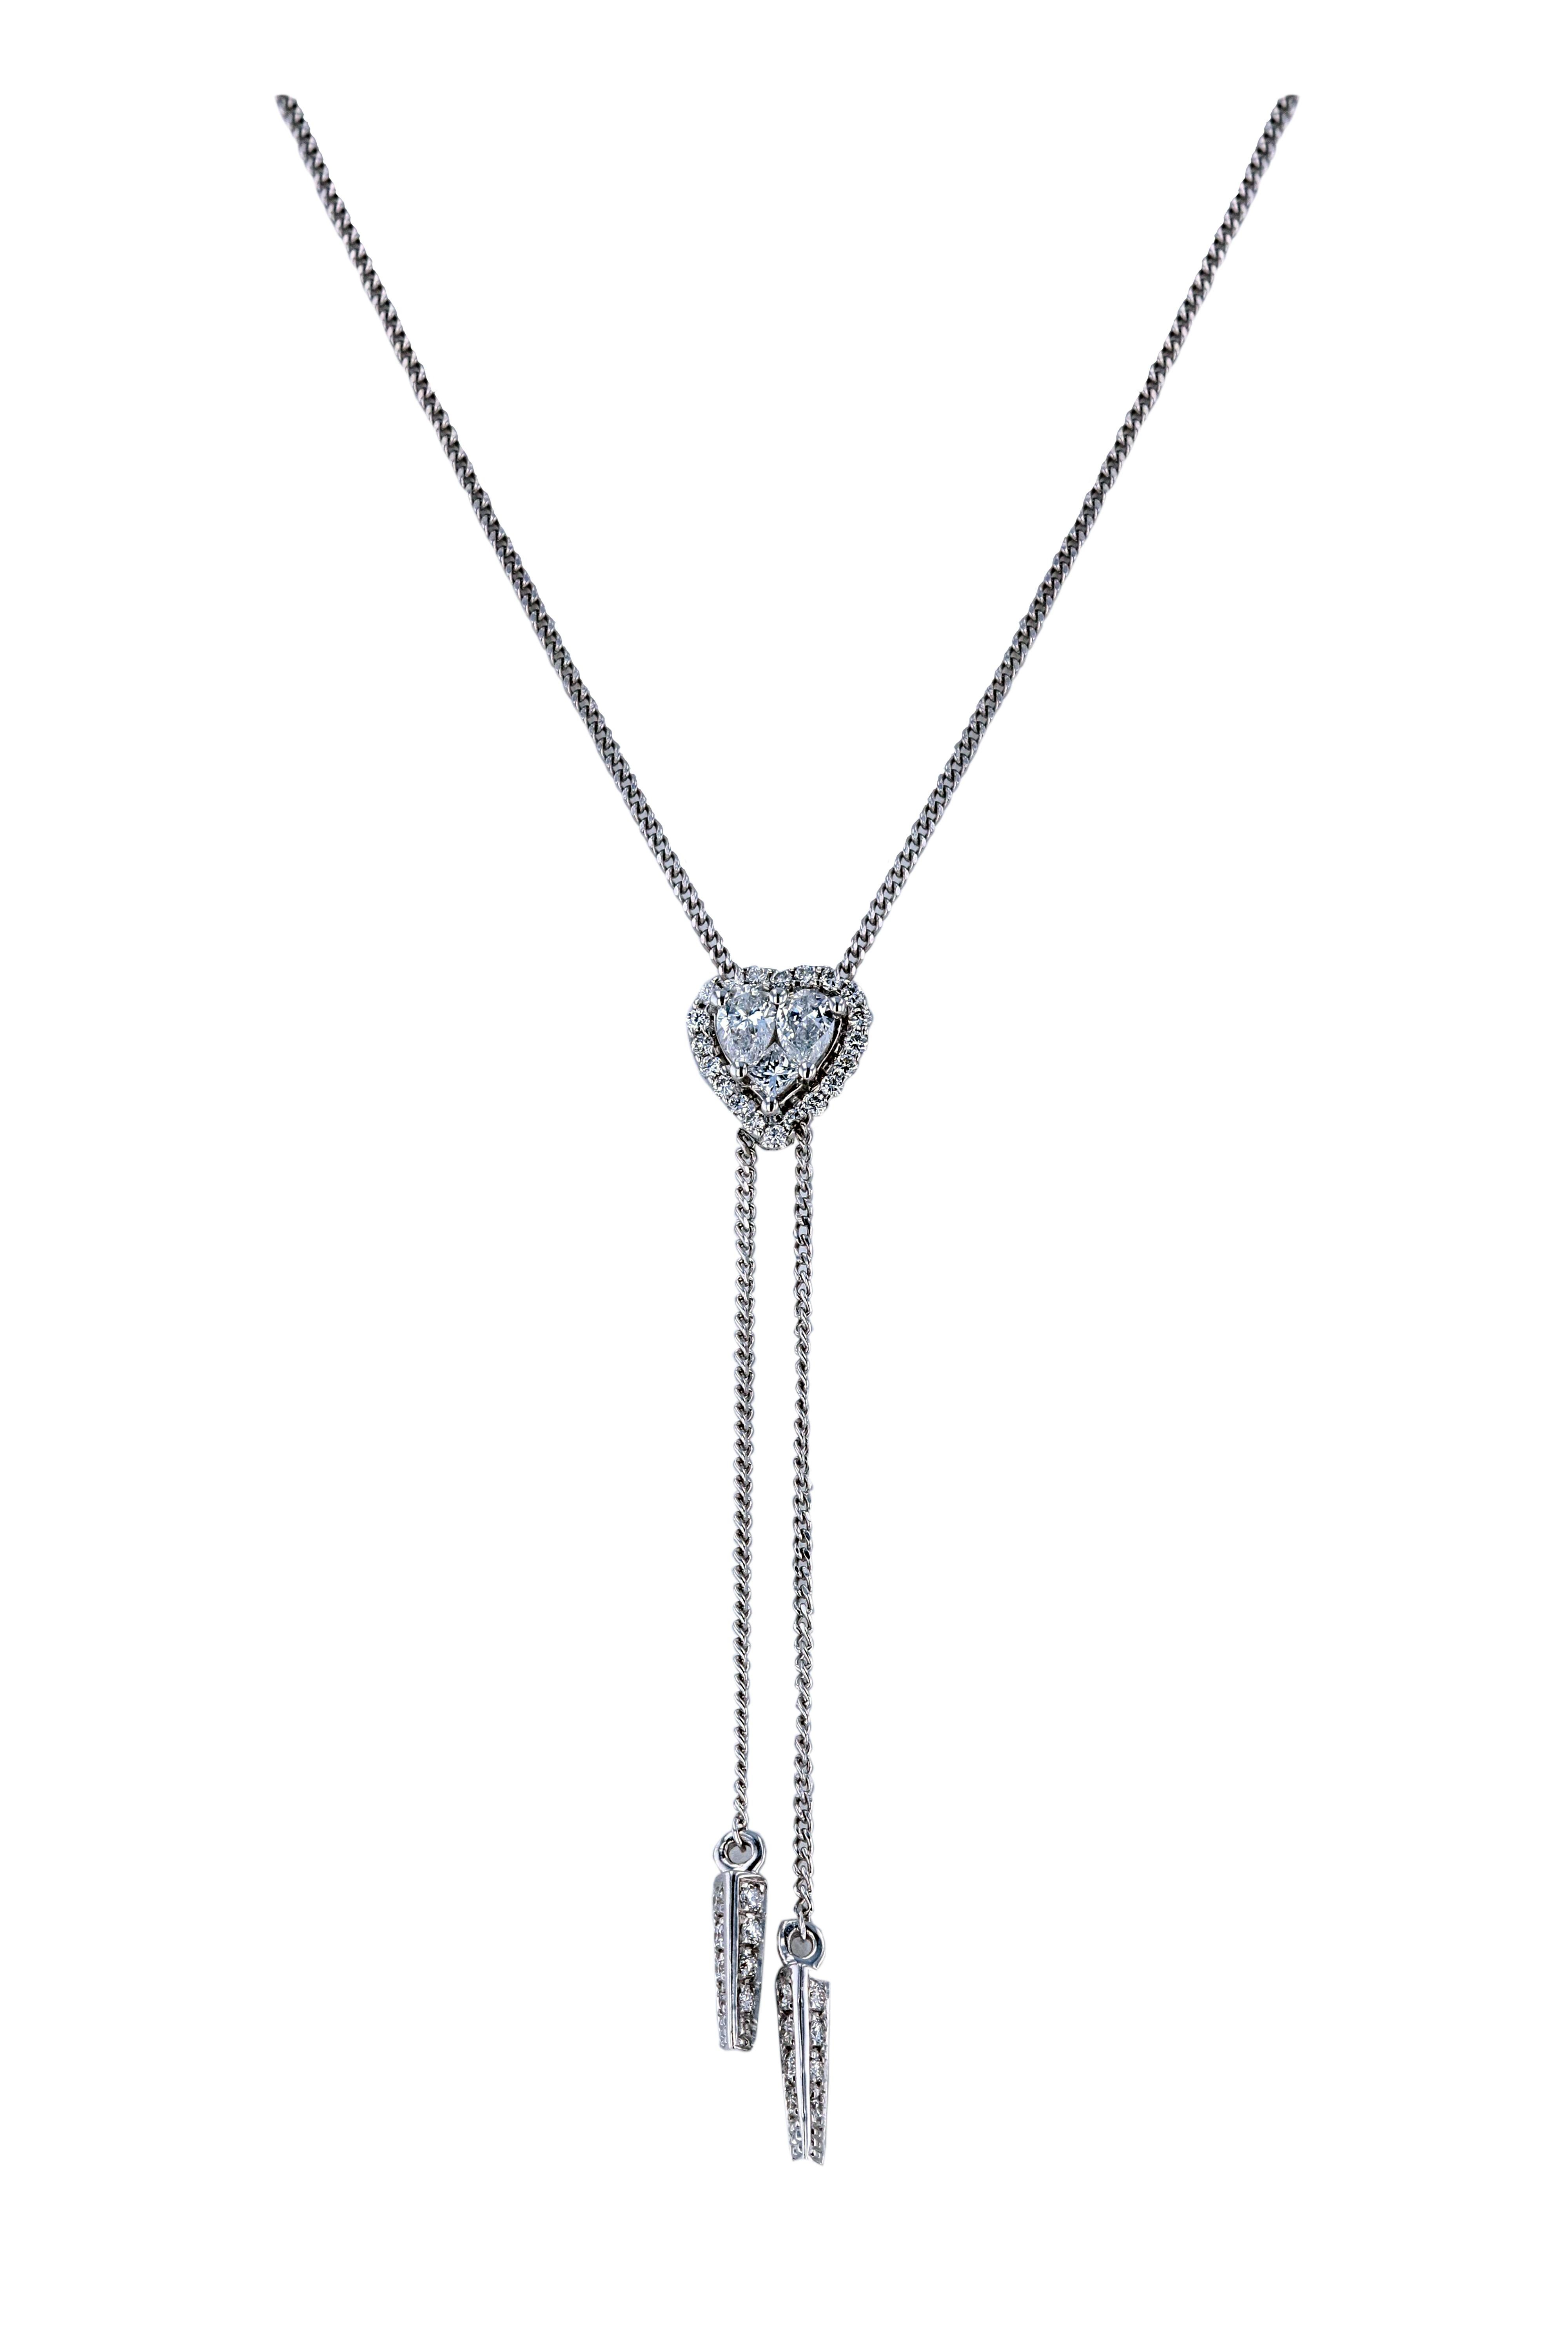 Feeling attractive is a strong emotional desire that could be a benefit of your Amwaj gold necklace with white diamonds (pear and princess shape) that are making an  illusion of heart shape solitaire. Elegant and classy, this delicate necklace makes